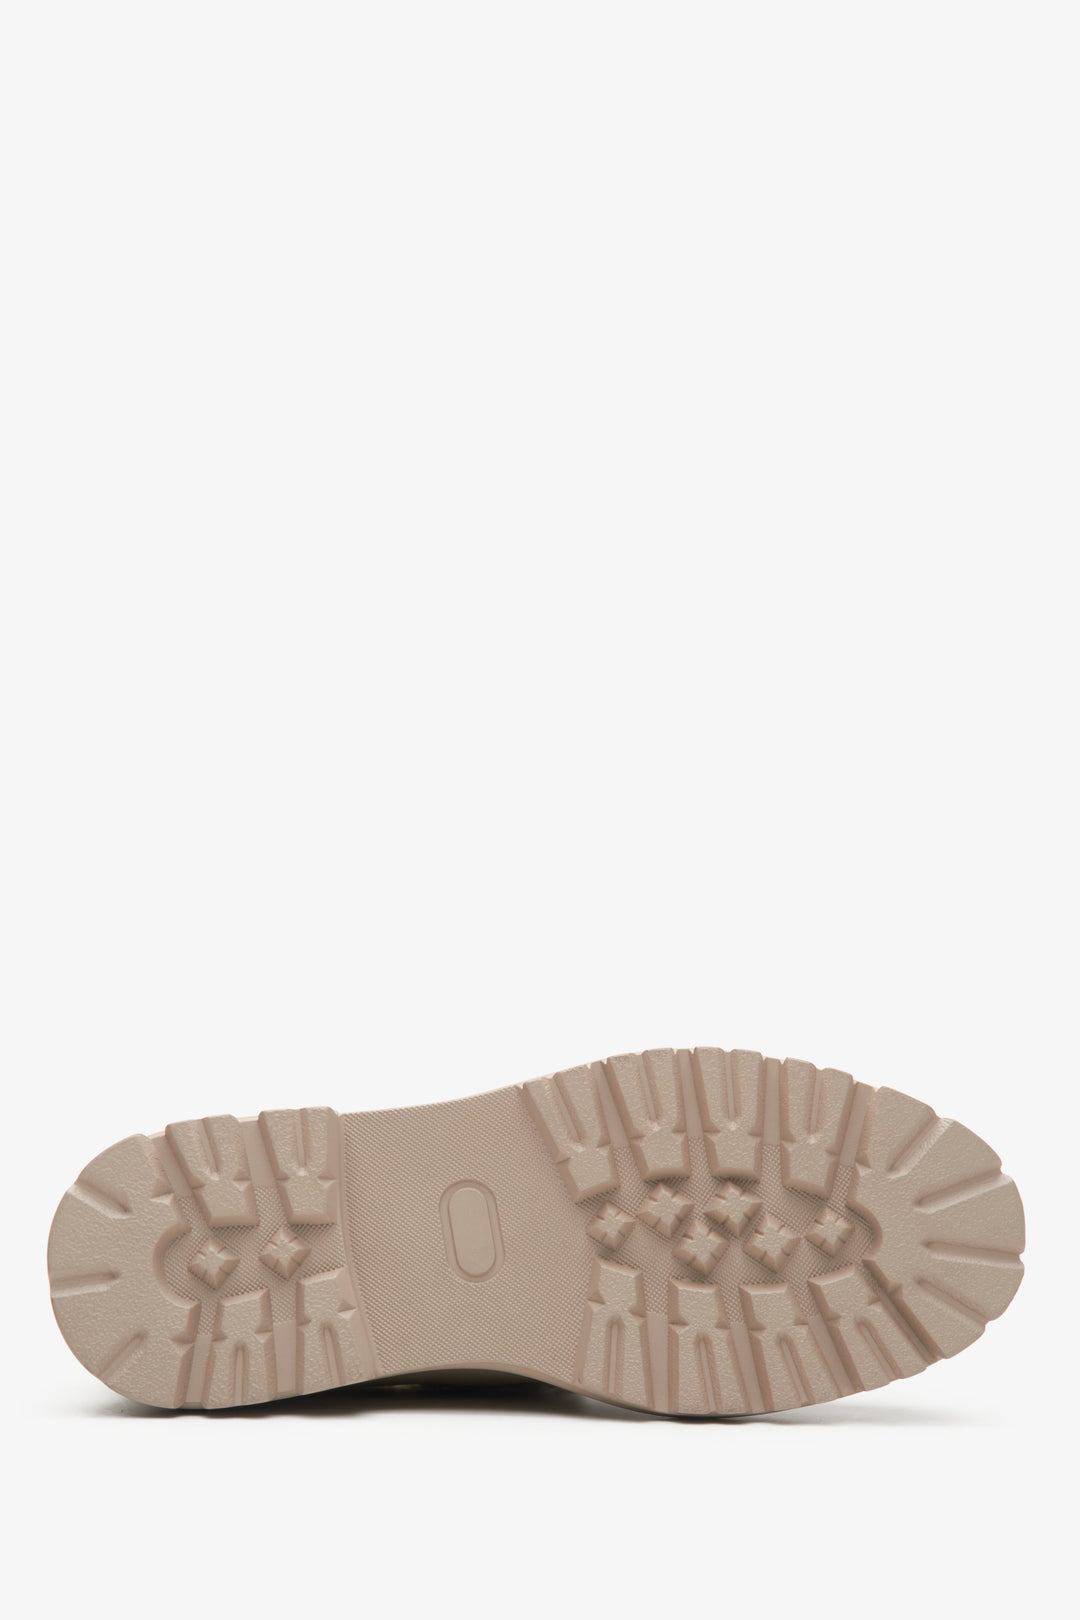 Women's leather moccasins with a glossy finish in beige - close-up on the sole.